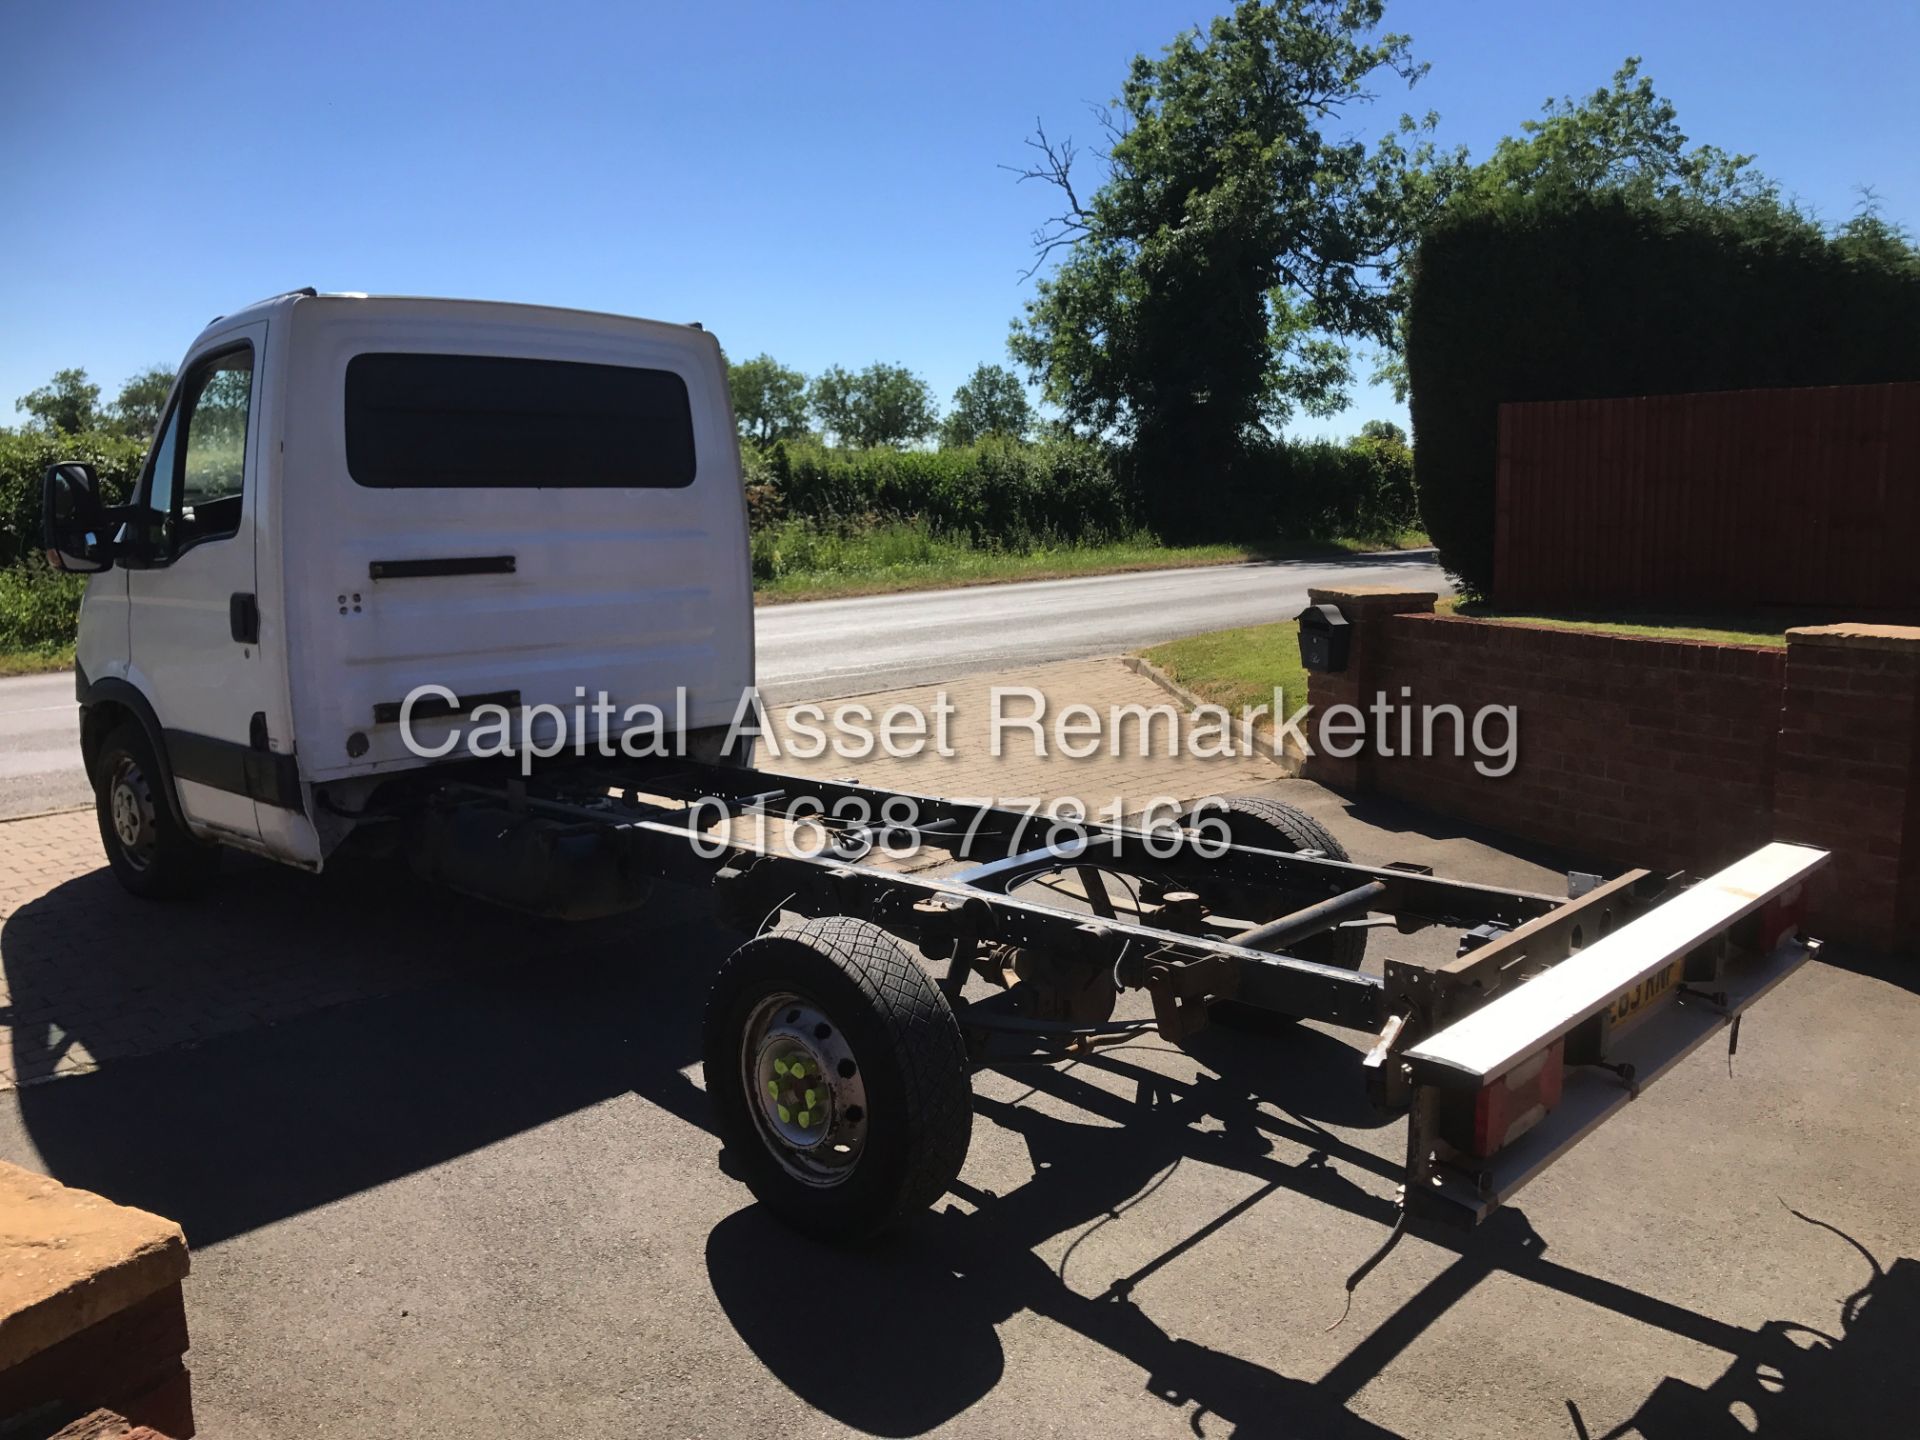 IVECO DAILY LONG WHEEL BASE TRUCK - CAB & CHASSIS - 63 REG - IDEAL RECOVERY VEHICLE / SCAFFOLDING - Image 2 of 10